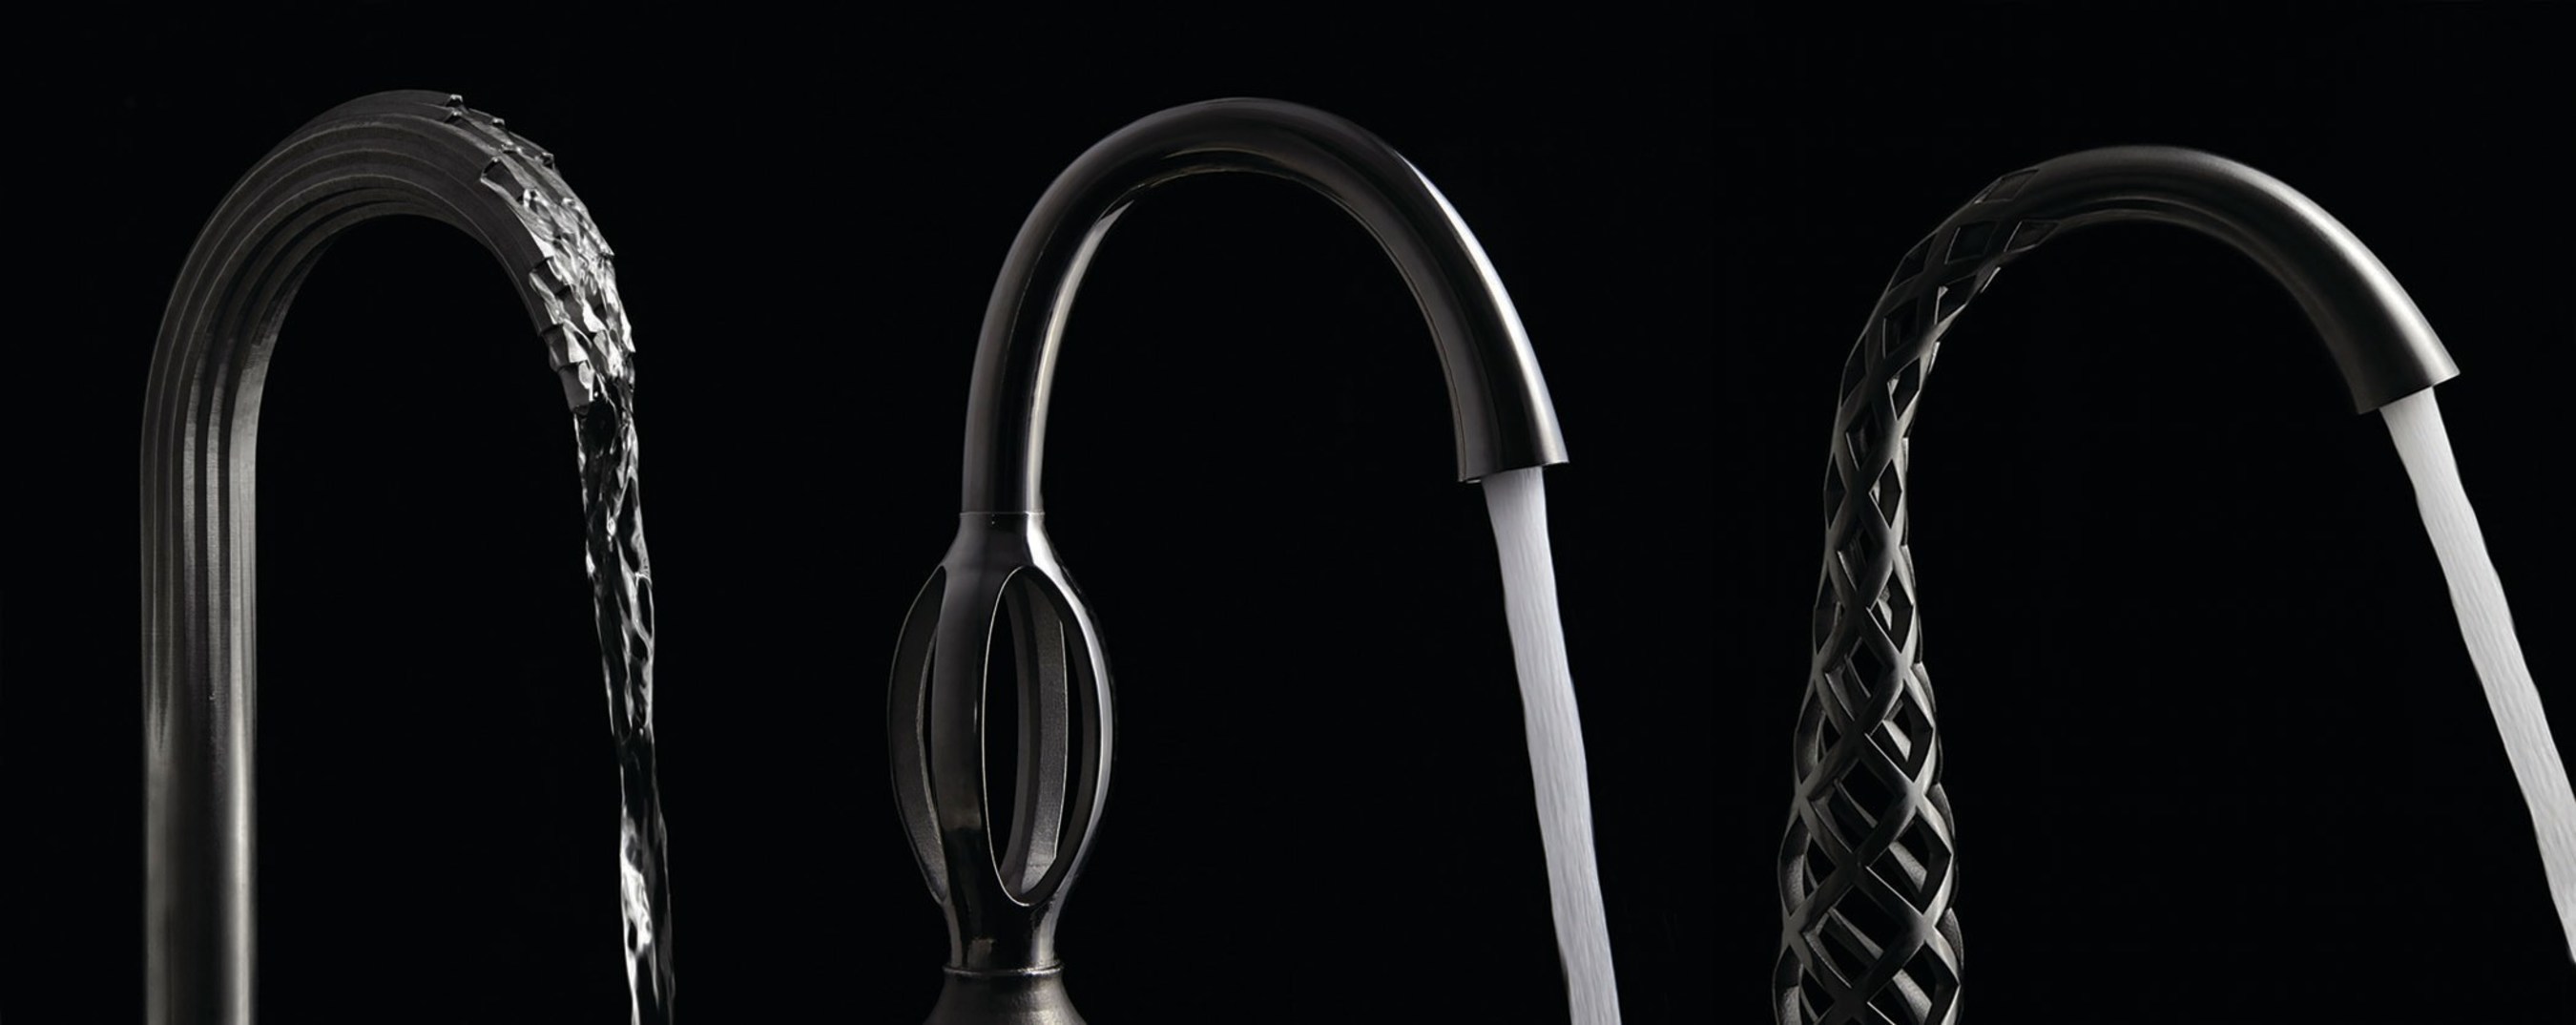 The DXV Shadowbrook, Trope and Vibrato bathroom sink faucets are the first commercially-available residential faucets created with additive manufacturing, better known as 3D printing, representing a breathtaking revolution in faucet design and engineering. This groundbreaking collection of 3D printed faucets won the Silver in the recent 2016 IDSA International Design Excellence Awards.